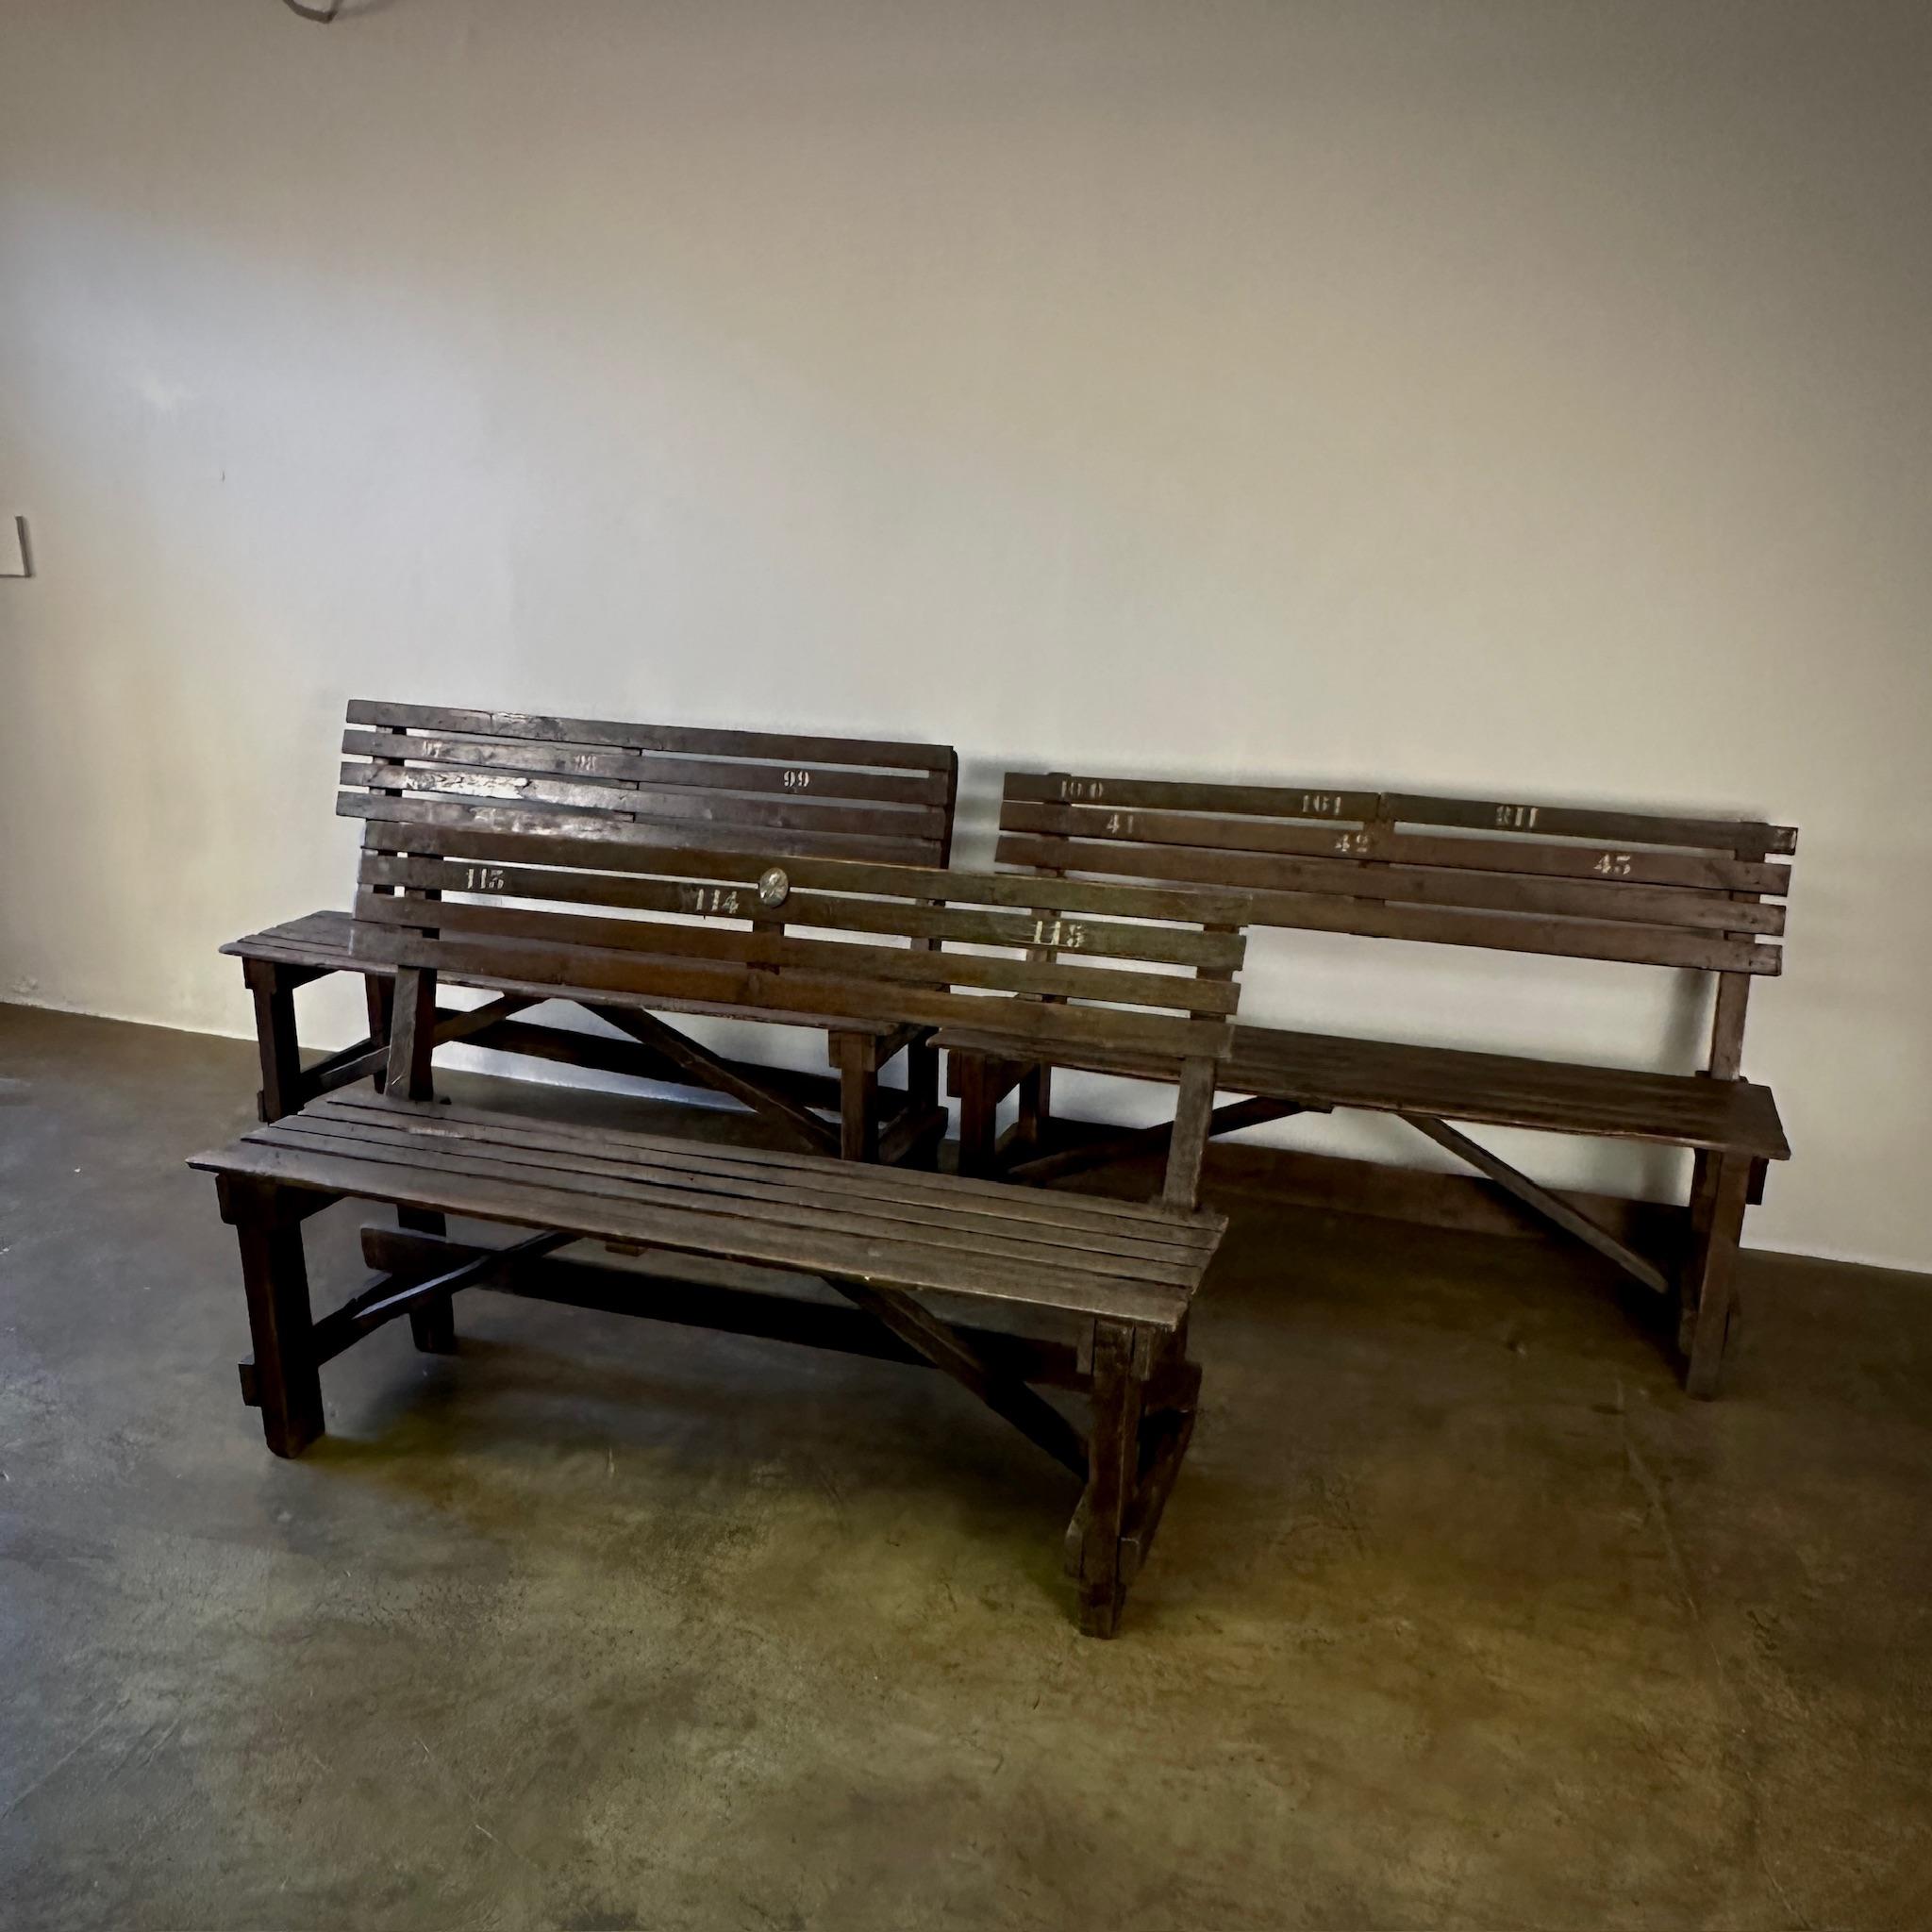 Three rustic wood benches, originally built for a boys school in late 19th century France. With their handsome scholastic feel and simple silhouette, these would work well in a variety of spaces. Can be sold individually.

France, circa